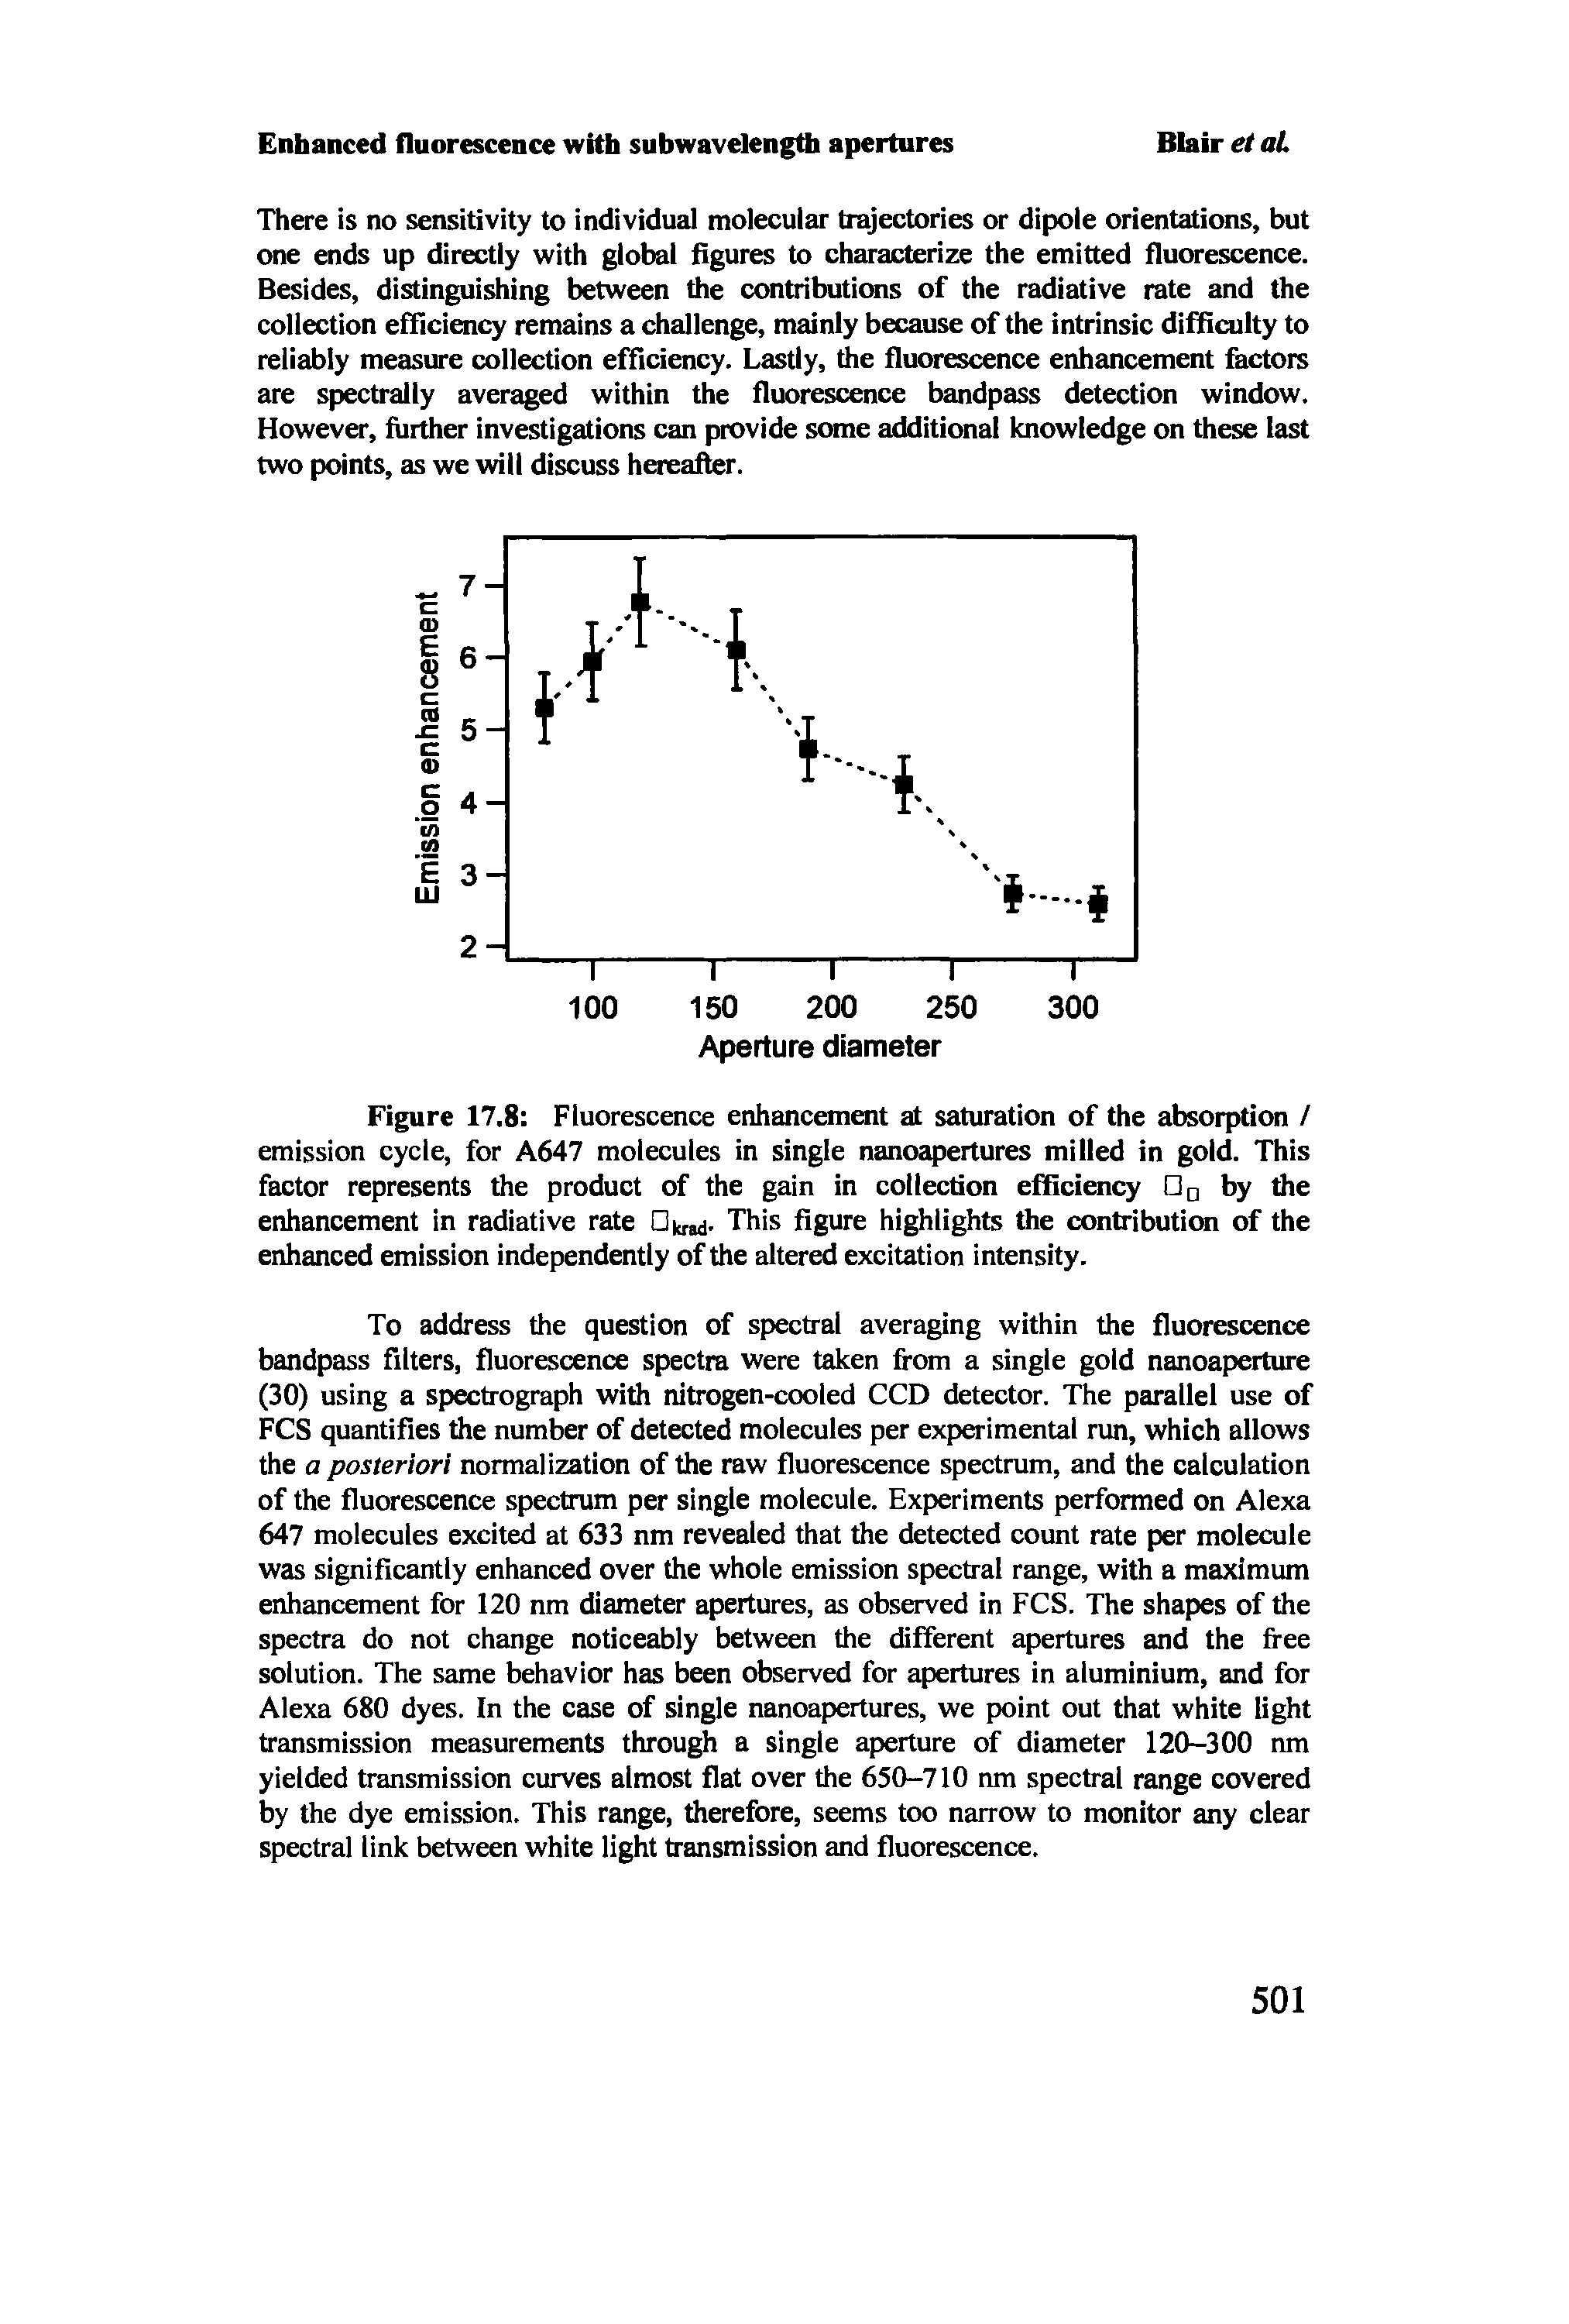 Figure 17,8 Fluorescence enhancement at saturation of the absorption / emission cycle, for A647 molecules in single nanoapertures milled in gold. This factor represents the product of the gain in collection efficiency by the enhancement in radiative rate Okrad- This figure highlights the contributicsi of the enhanced emission independently of the altered excitation intensity.